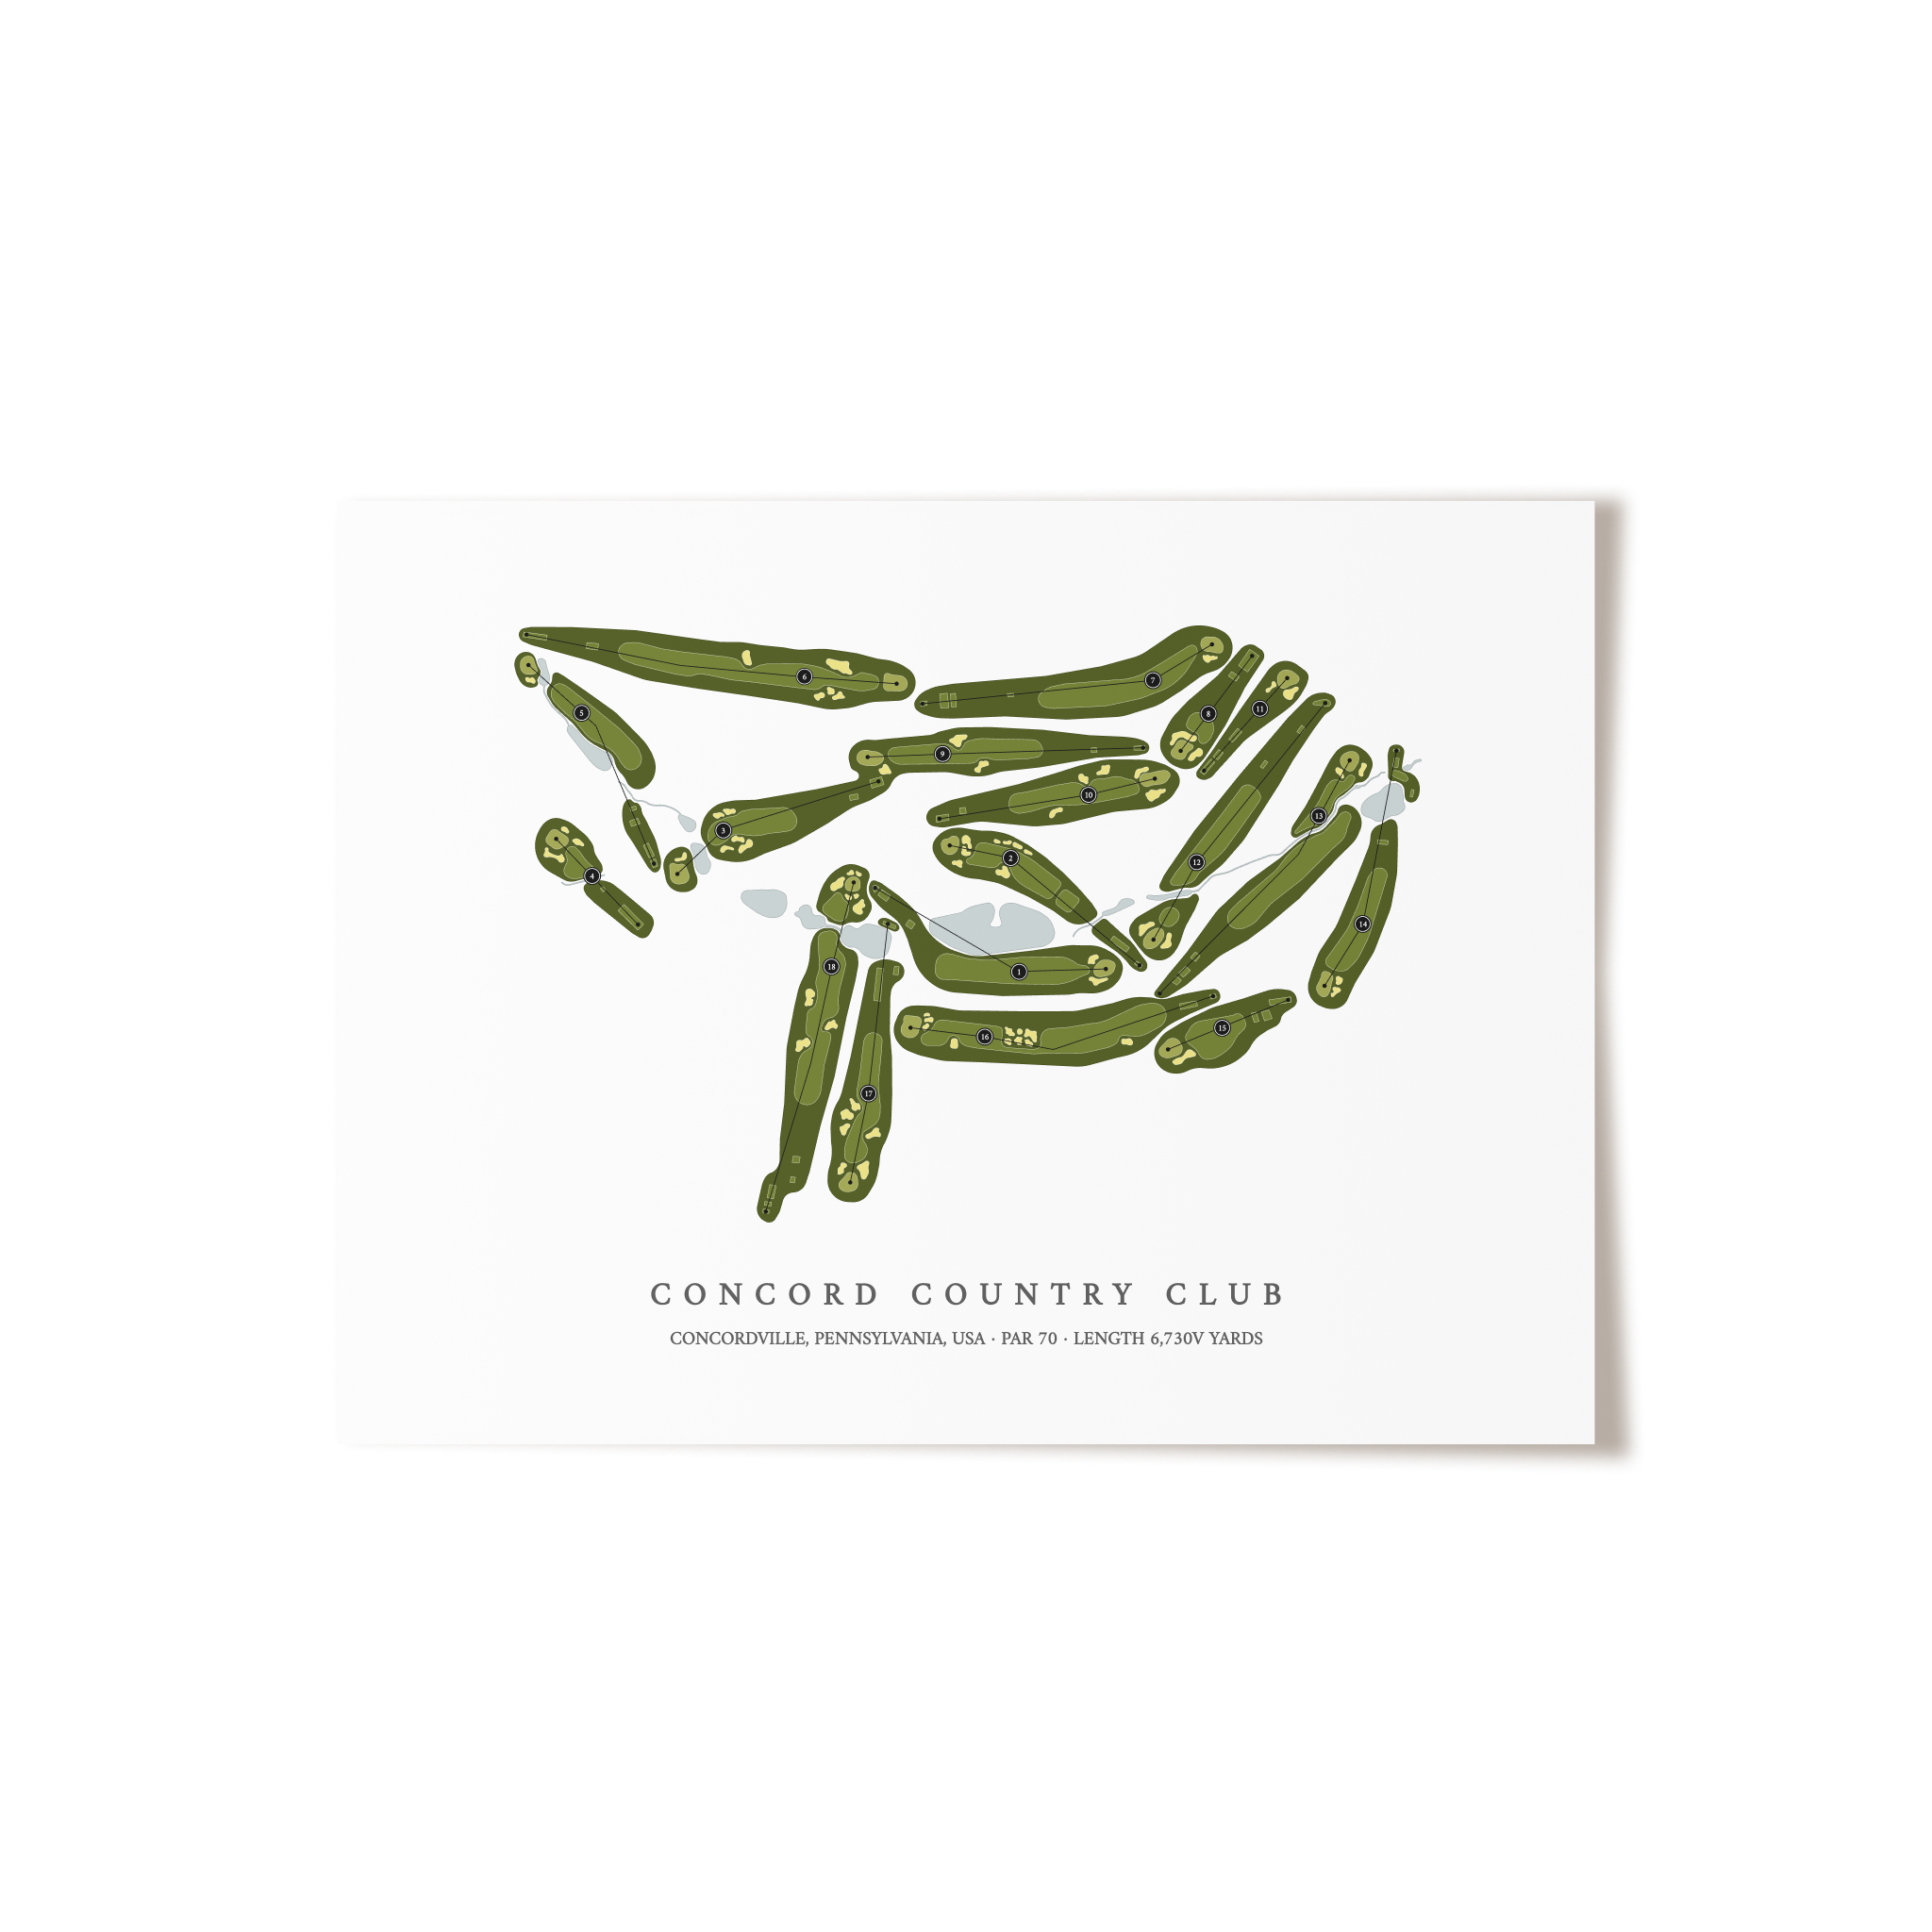 Concord Country Club | Golf Course Map | Unframed 